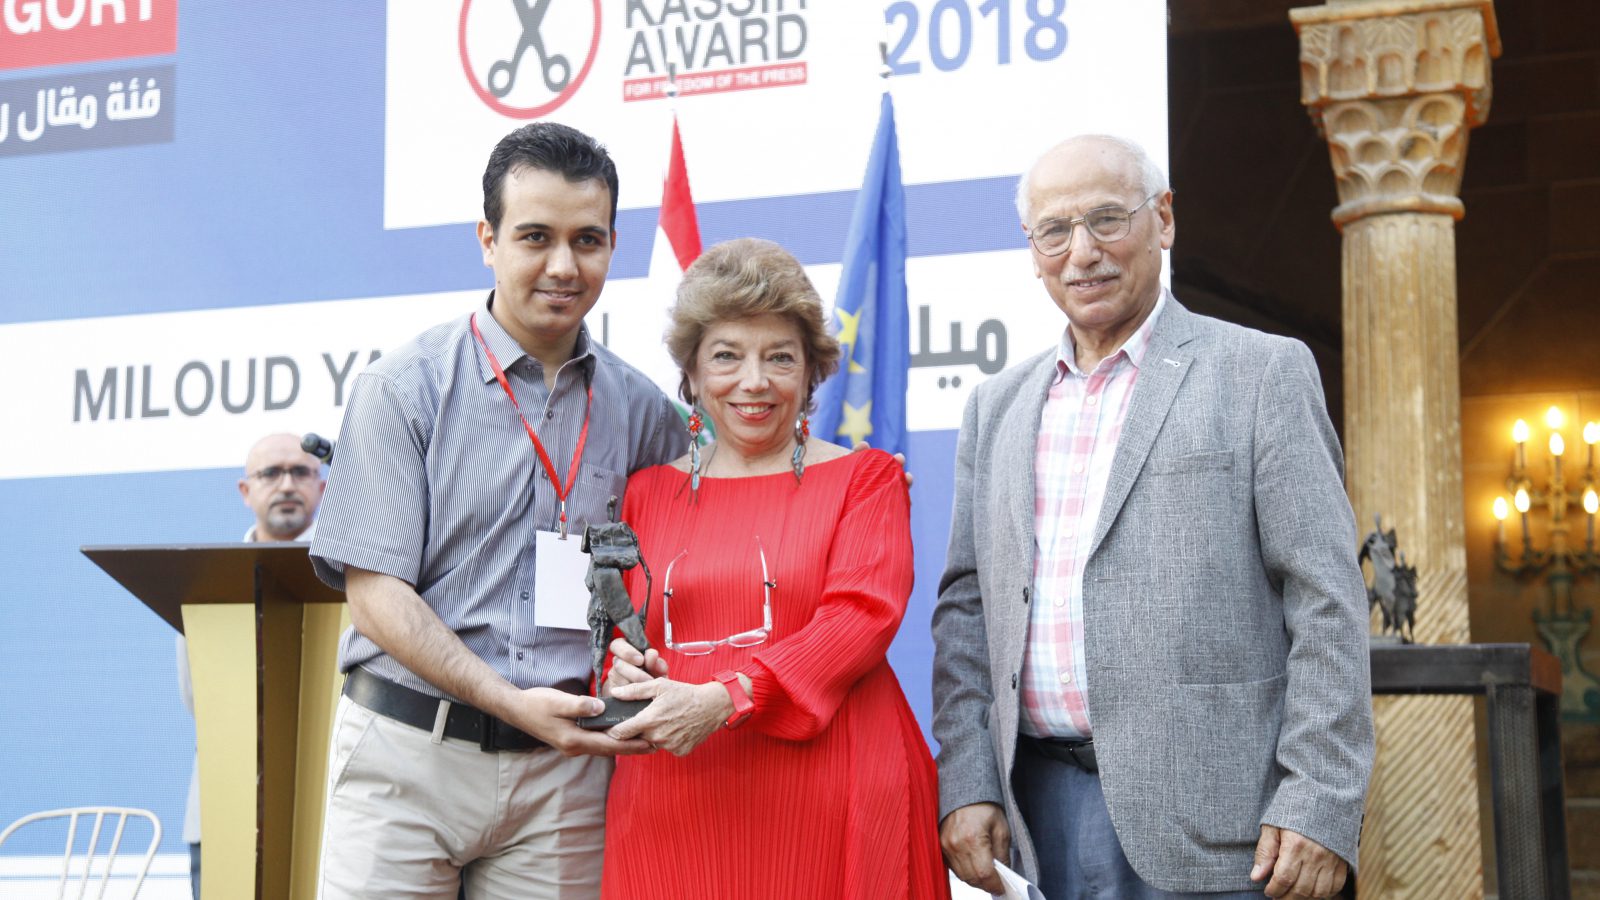 The “Samir Kassir Award for Freedom of the Press” funded by the European Union